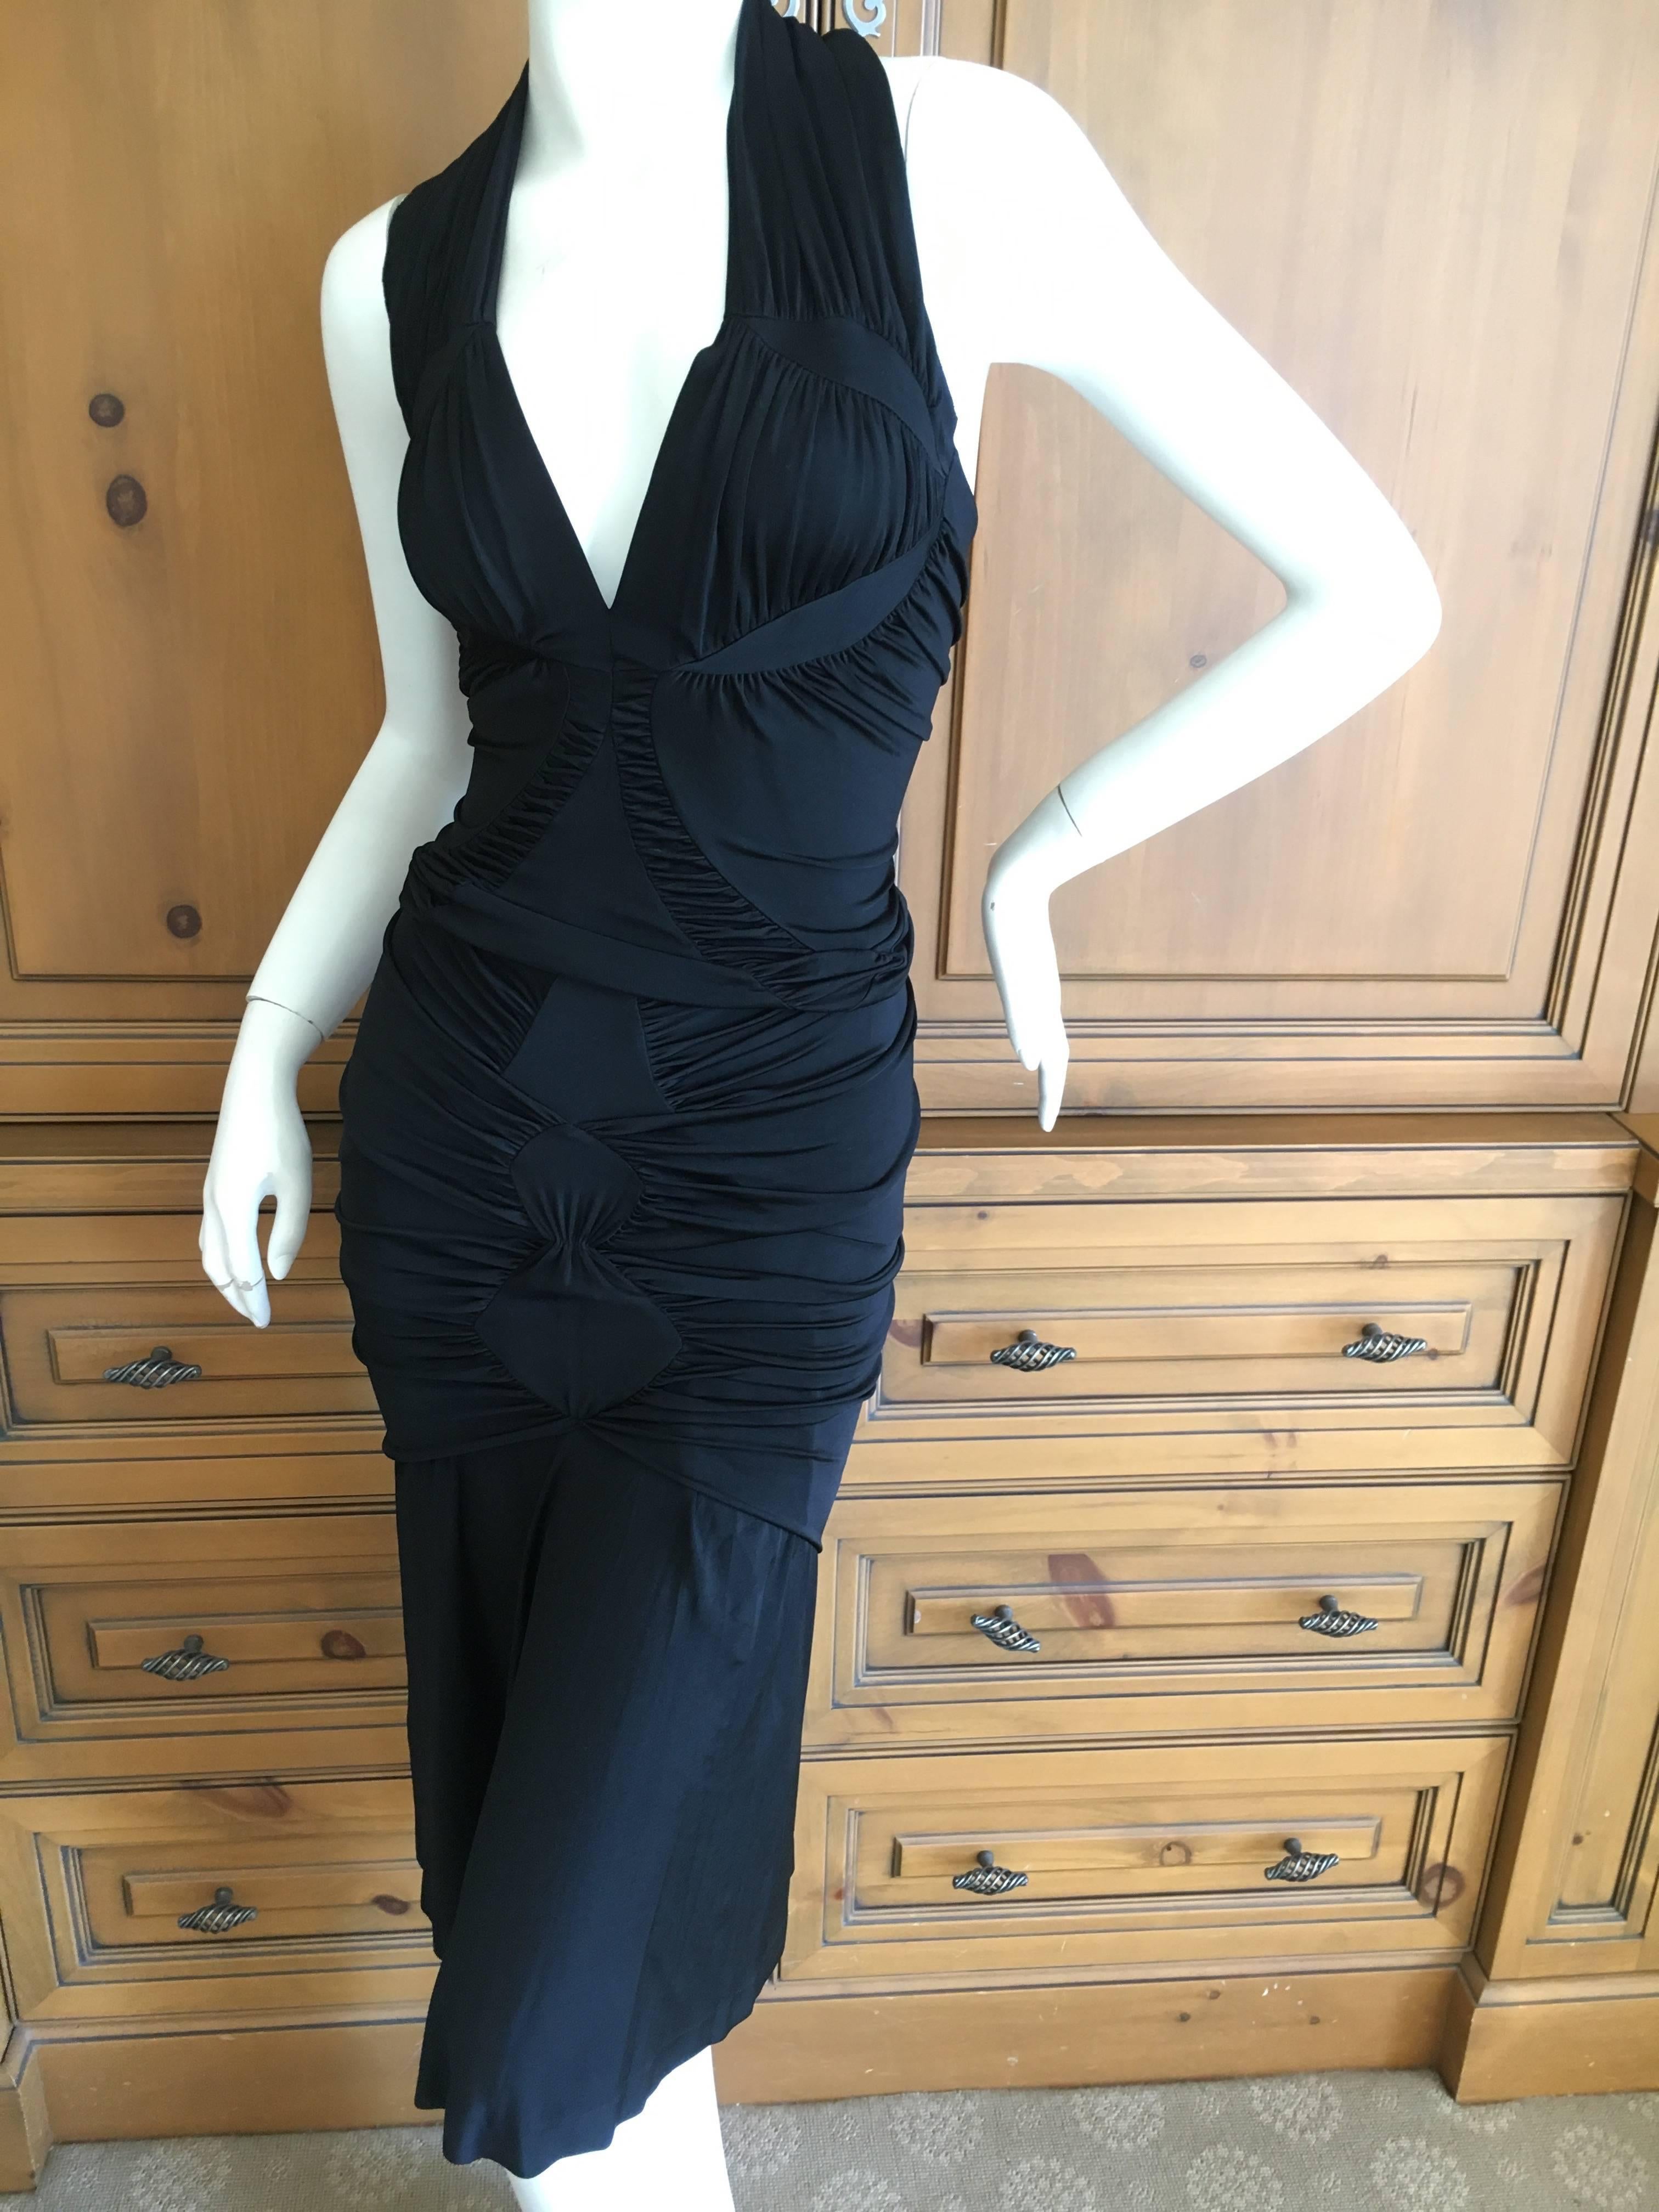 Yves Saint Laurent by Tom Ford Black Two Piece Cocktail Dress For Sale 4